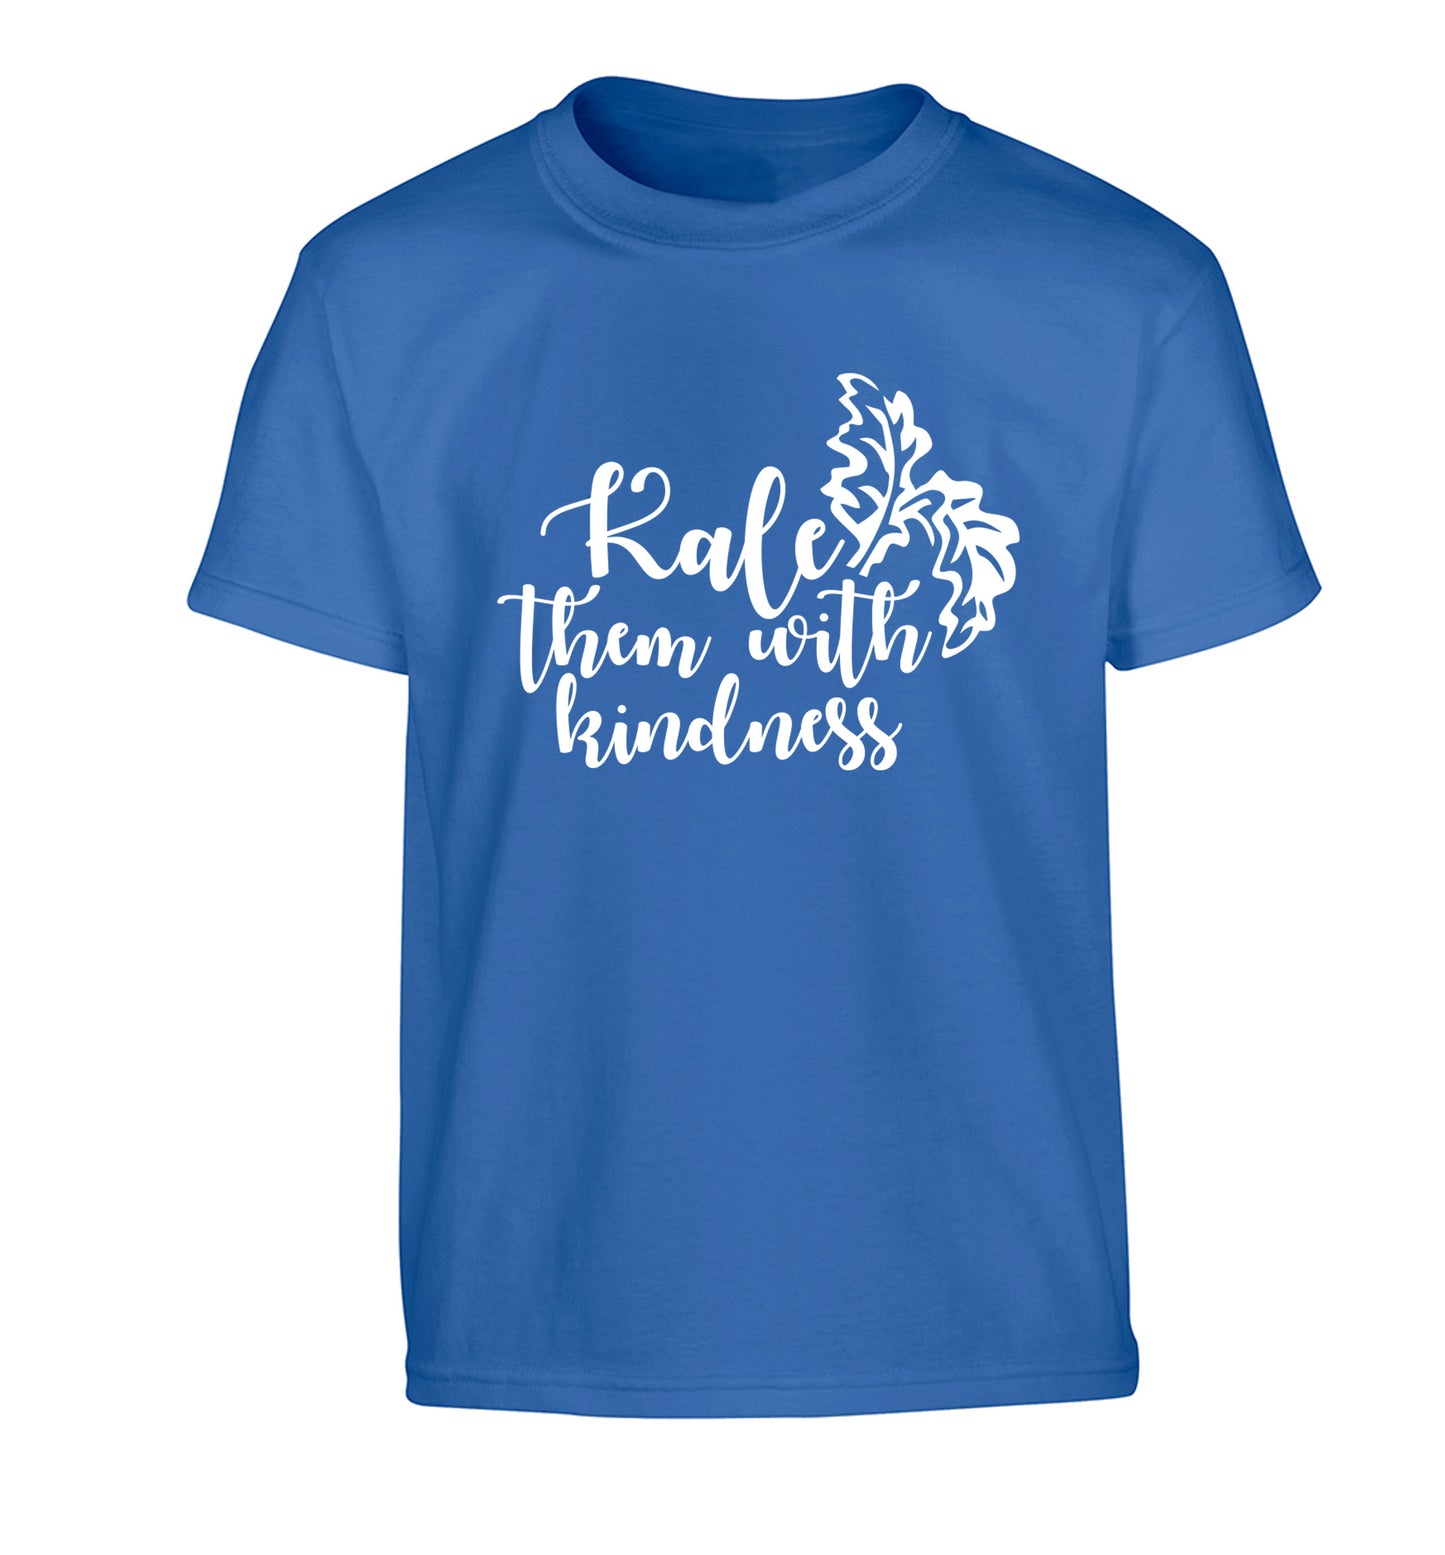 Kale them with kindness Children's blue Tshirt 12-14 Years